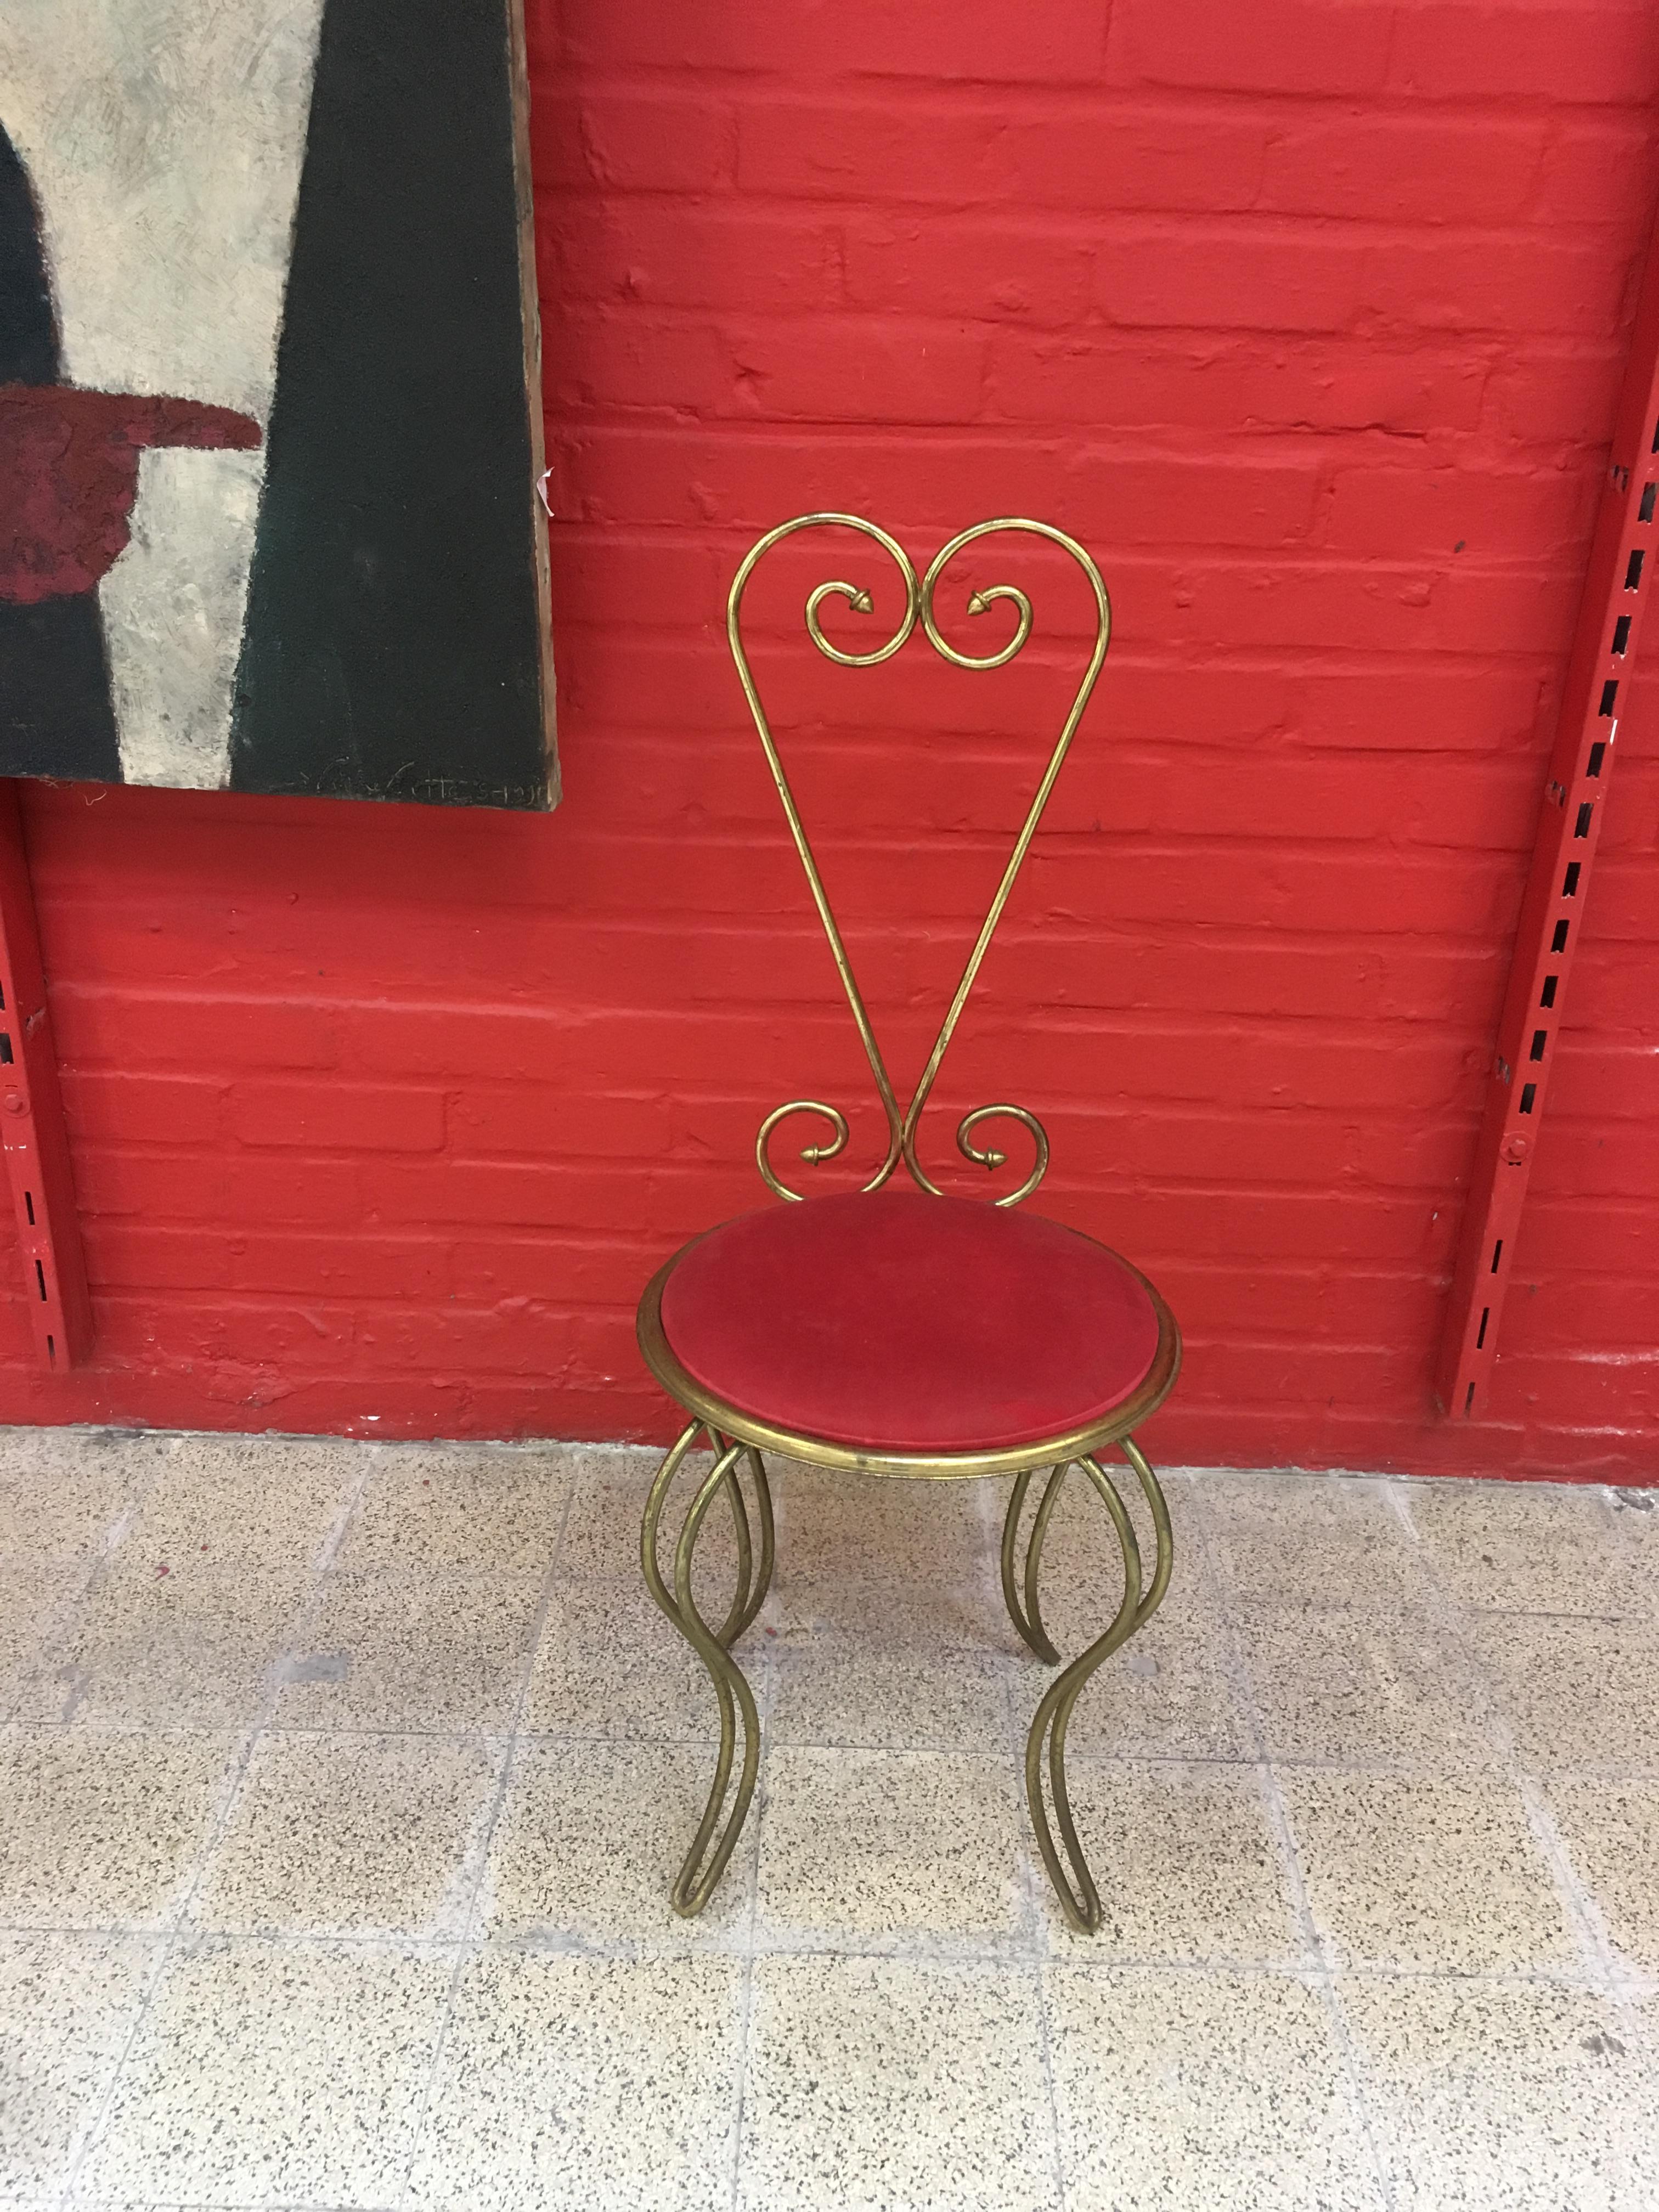 European Pair of Neoclassic Brass Chairs, circa 1940-1950 For Sale